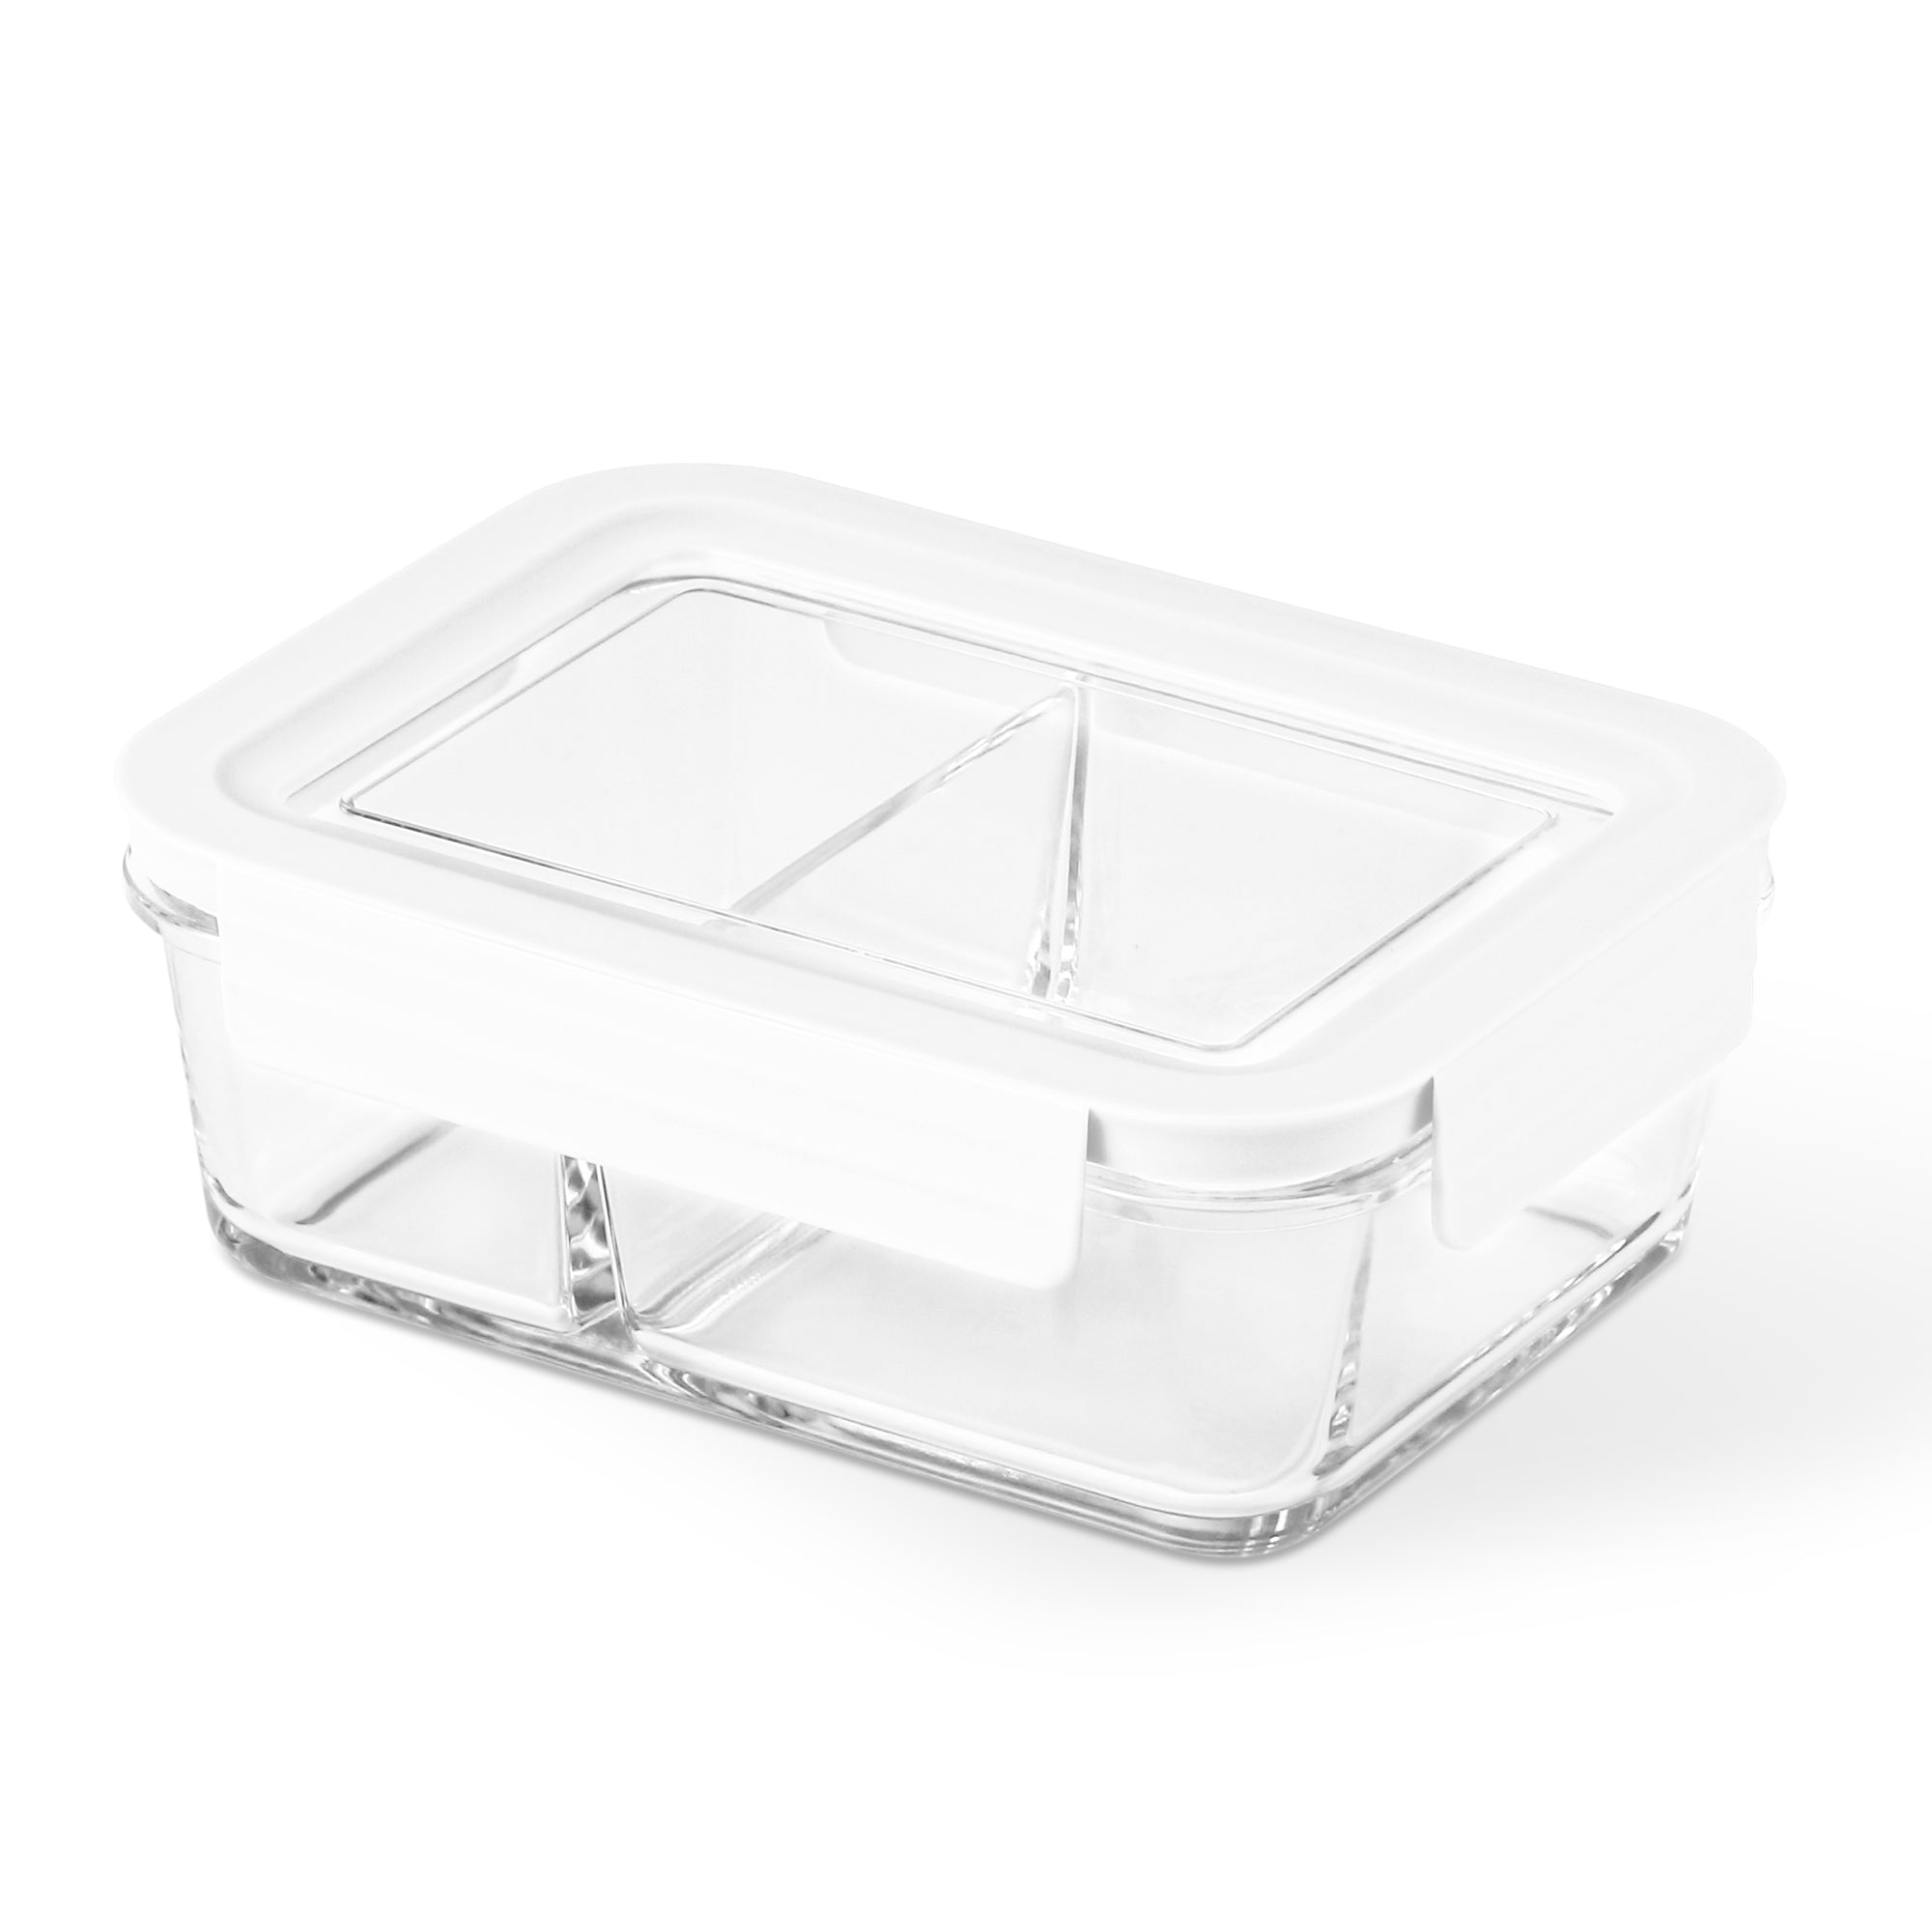 http://notiq.com/cdn/shop/products/meal-prep-glass-food-storage-containers-770261.jpg?v=1691693588&width=2048